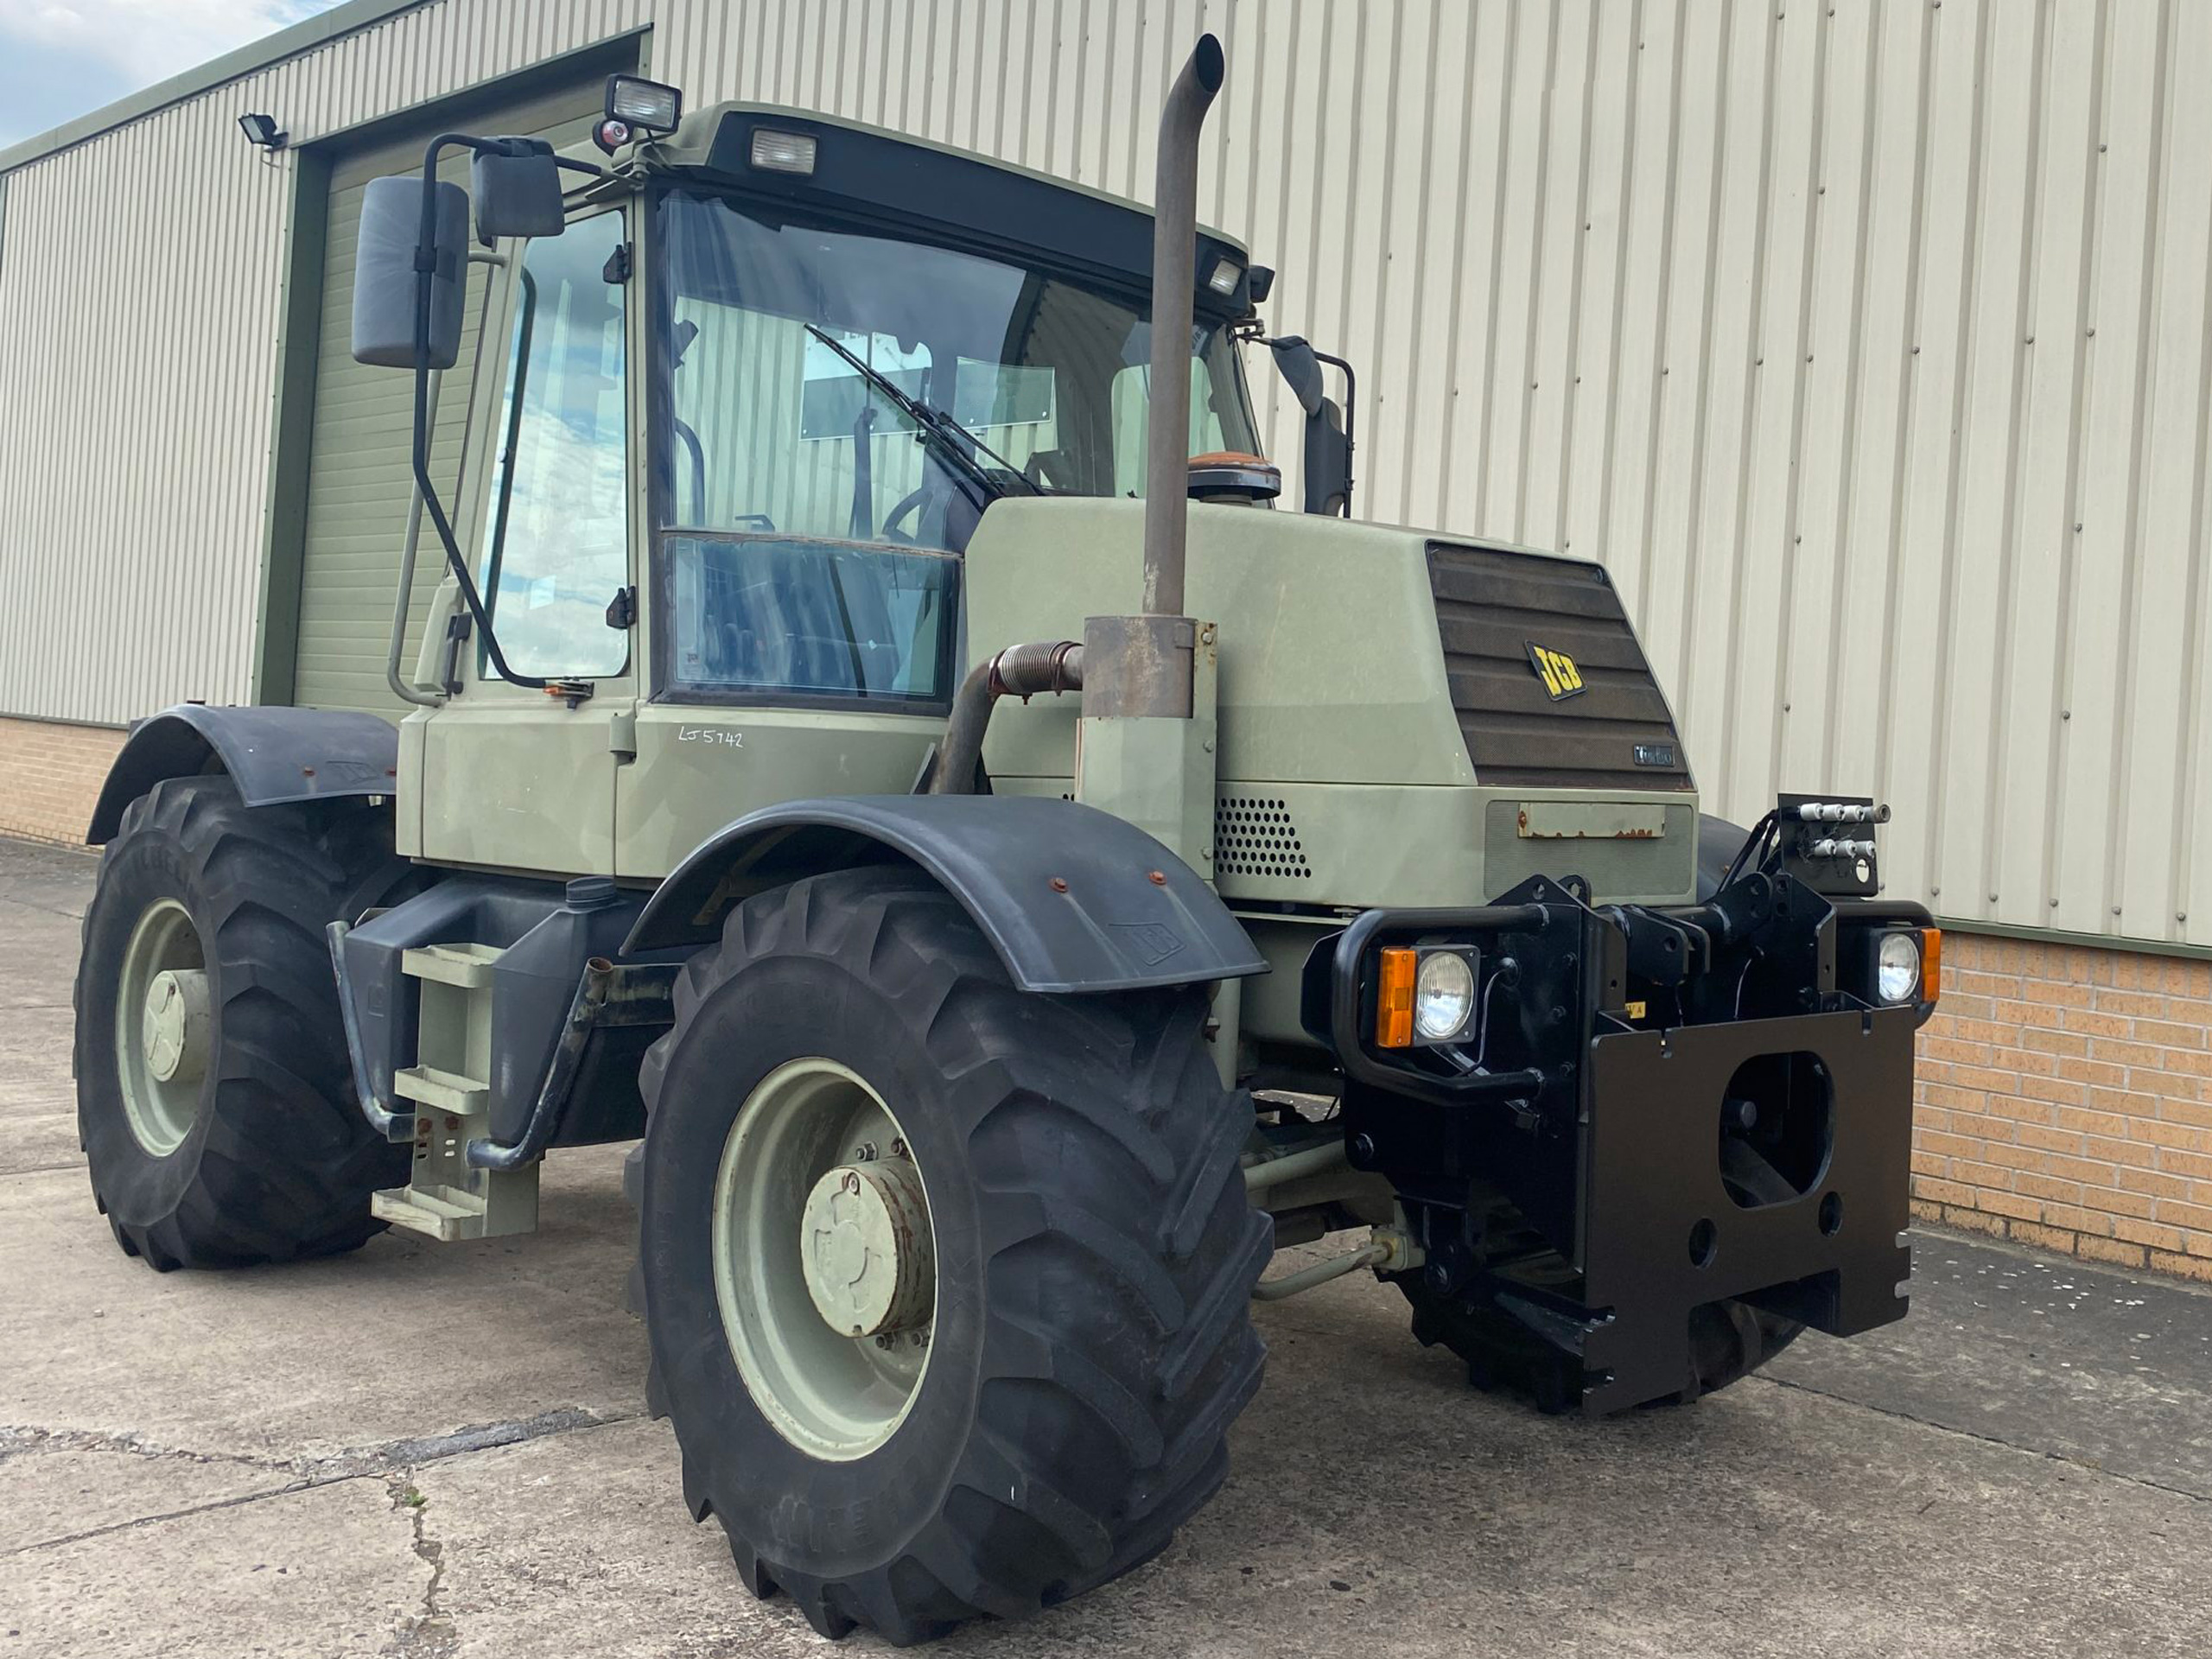 military vehicles for sale - JCB fastrac 150T 80 ex MoD